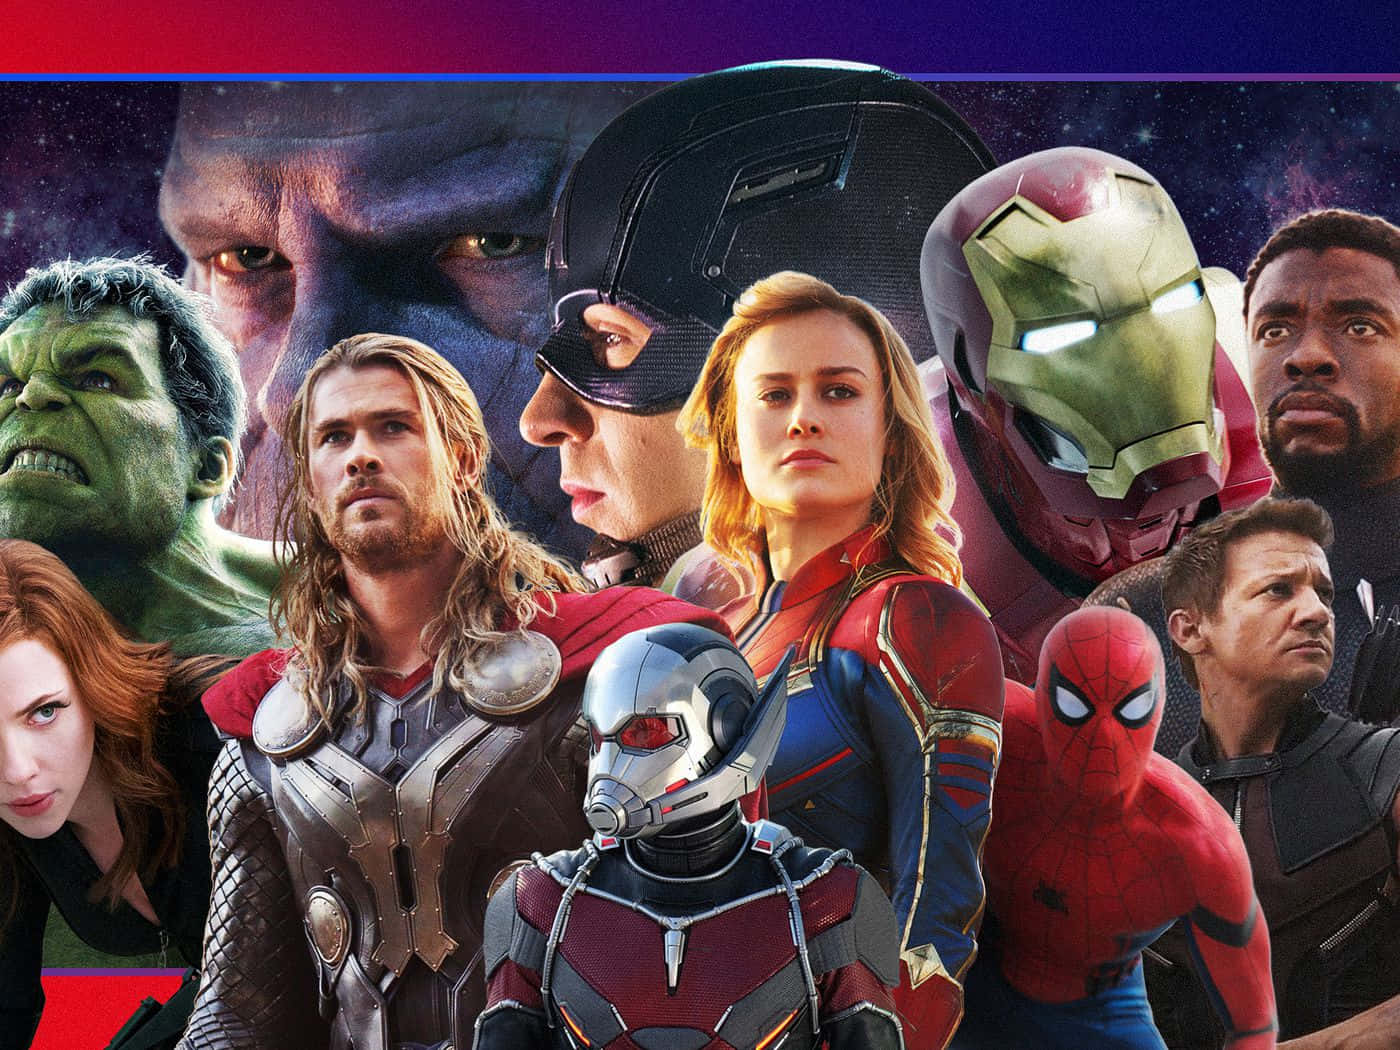 Avengers unite! Gather the superheroes of the Marvel Cinematic Universe to save the world!